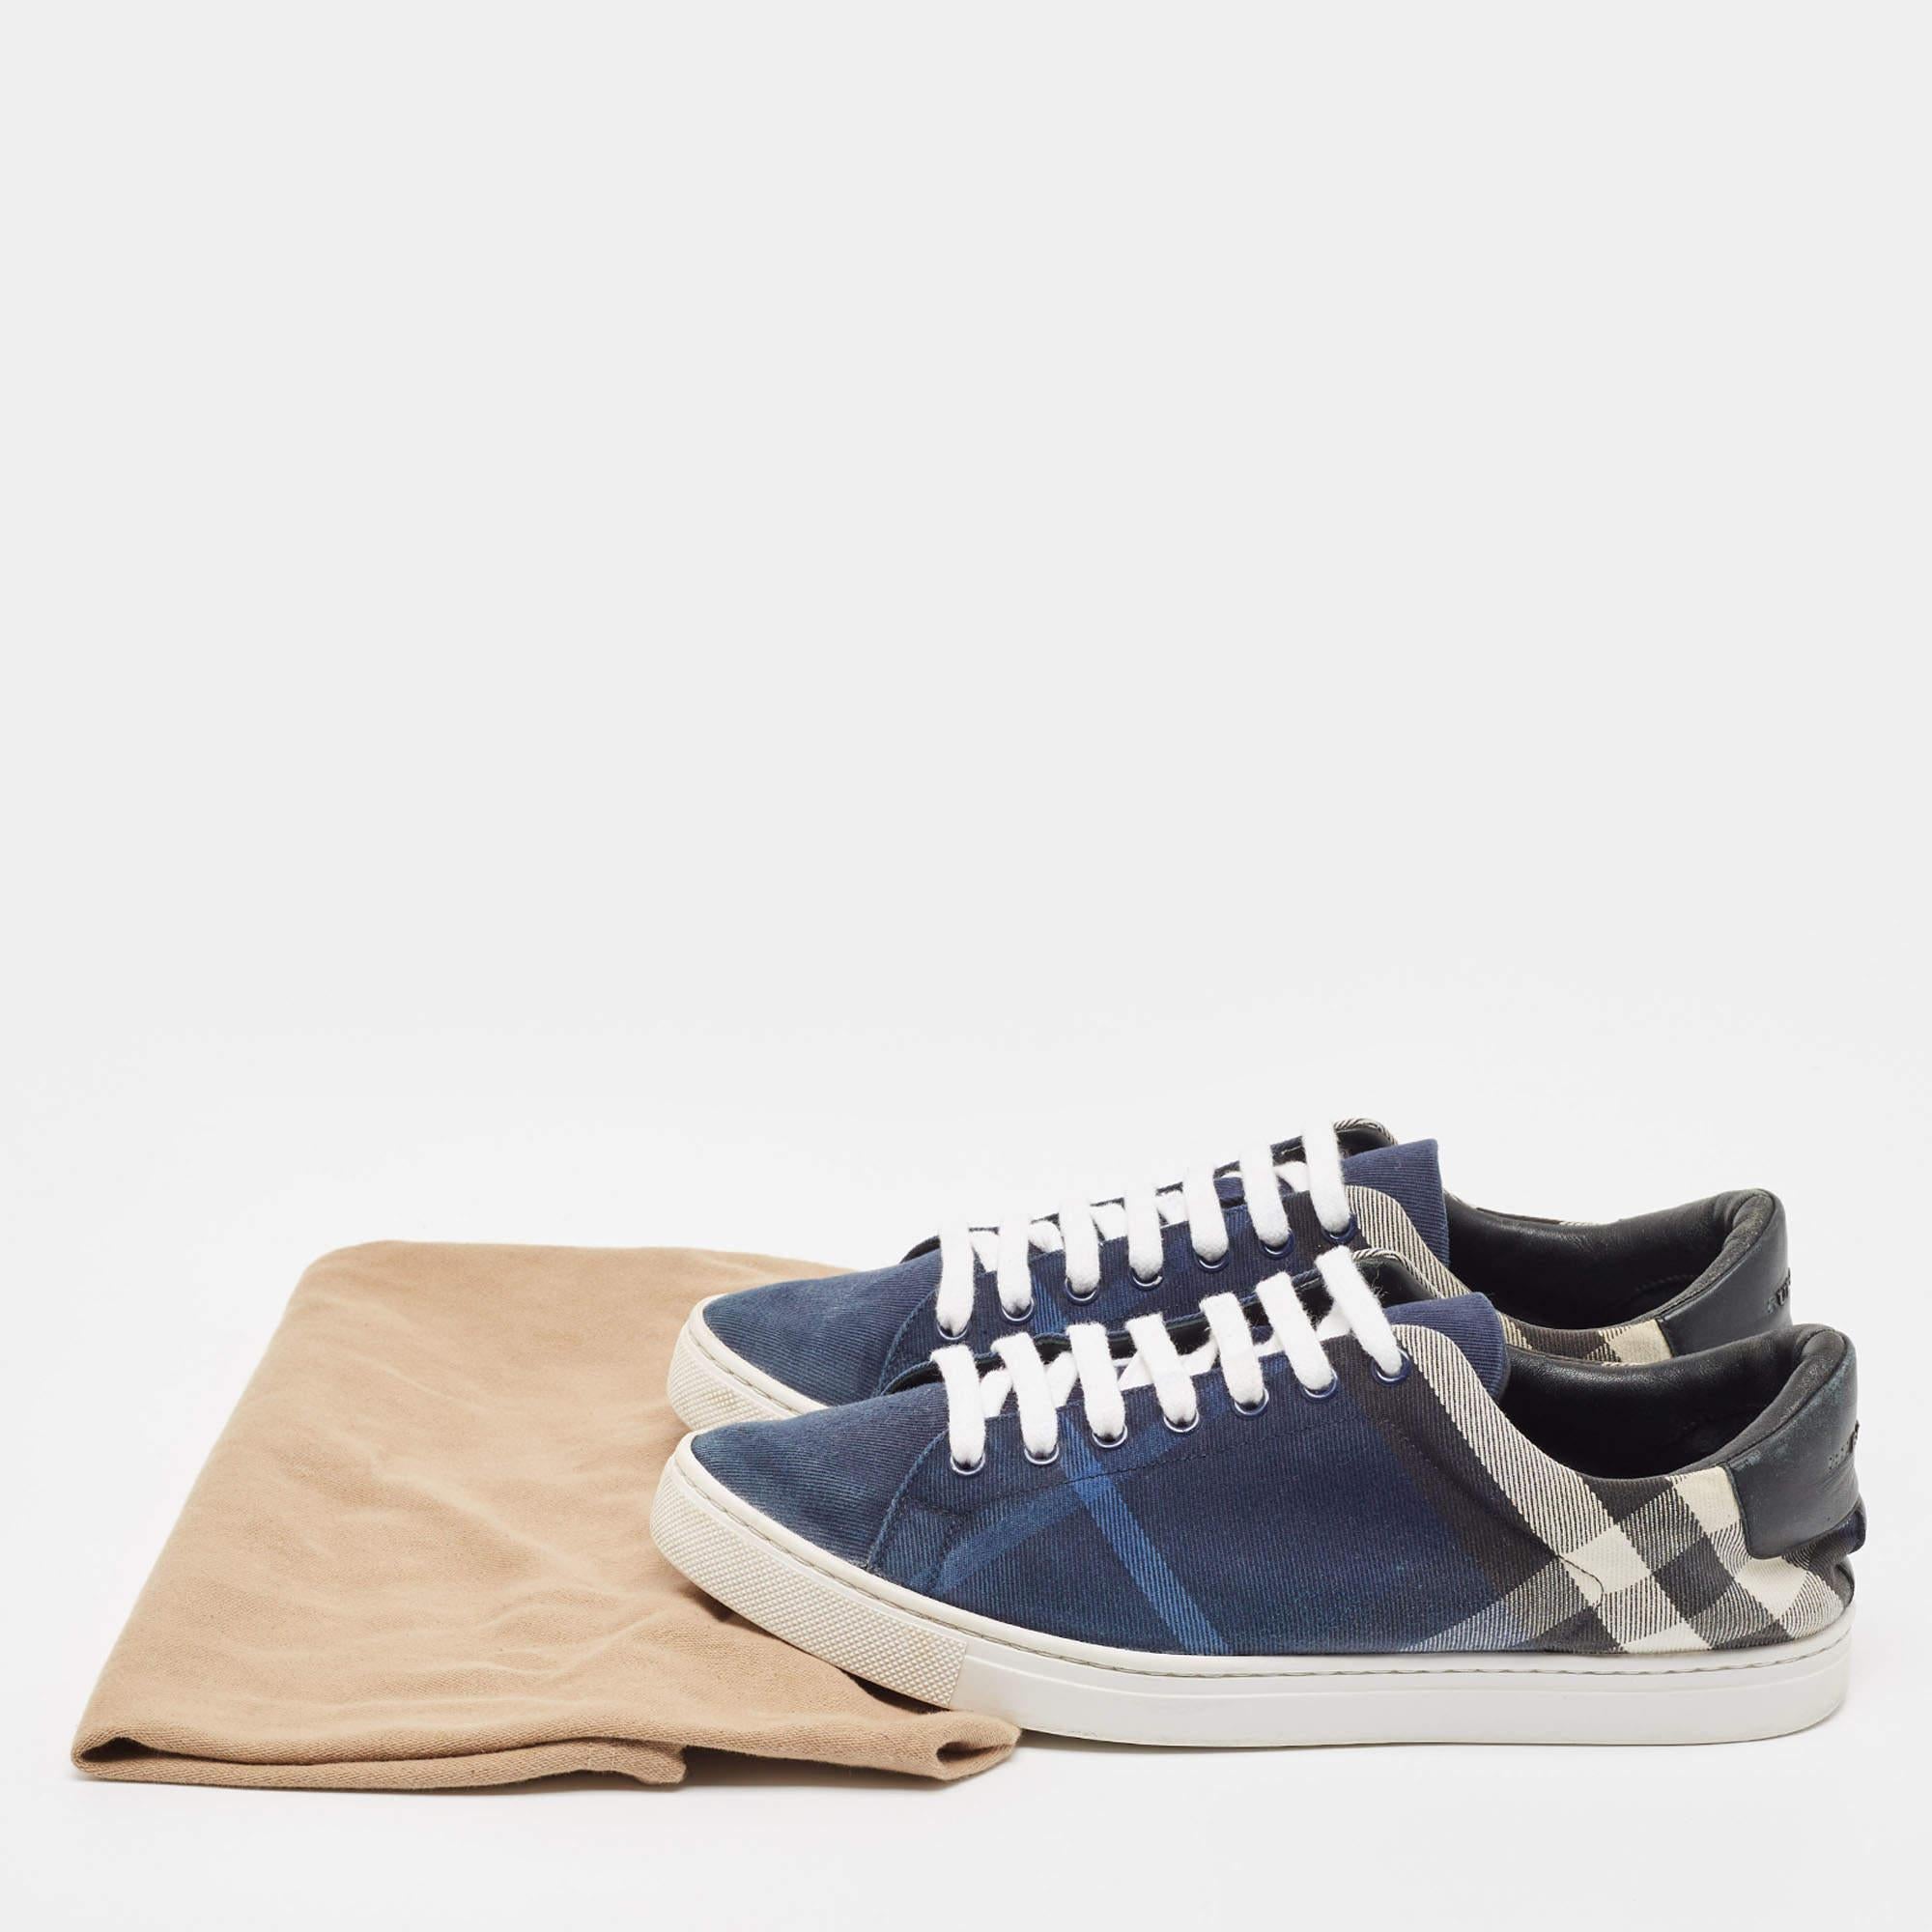 Burberry Blue/White Nova Check Denim and Leather Low Top Sneakers Size 44 For Sale 5